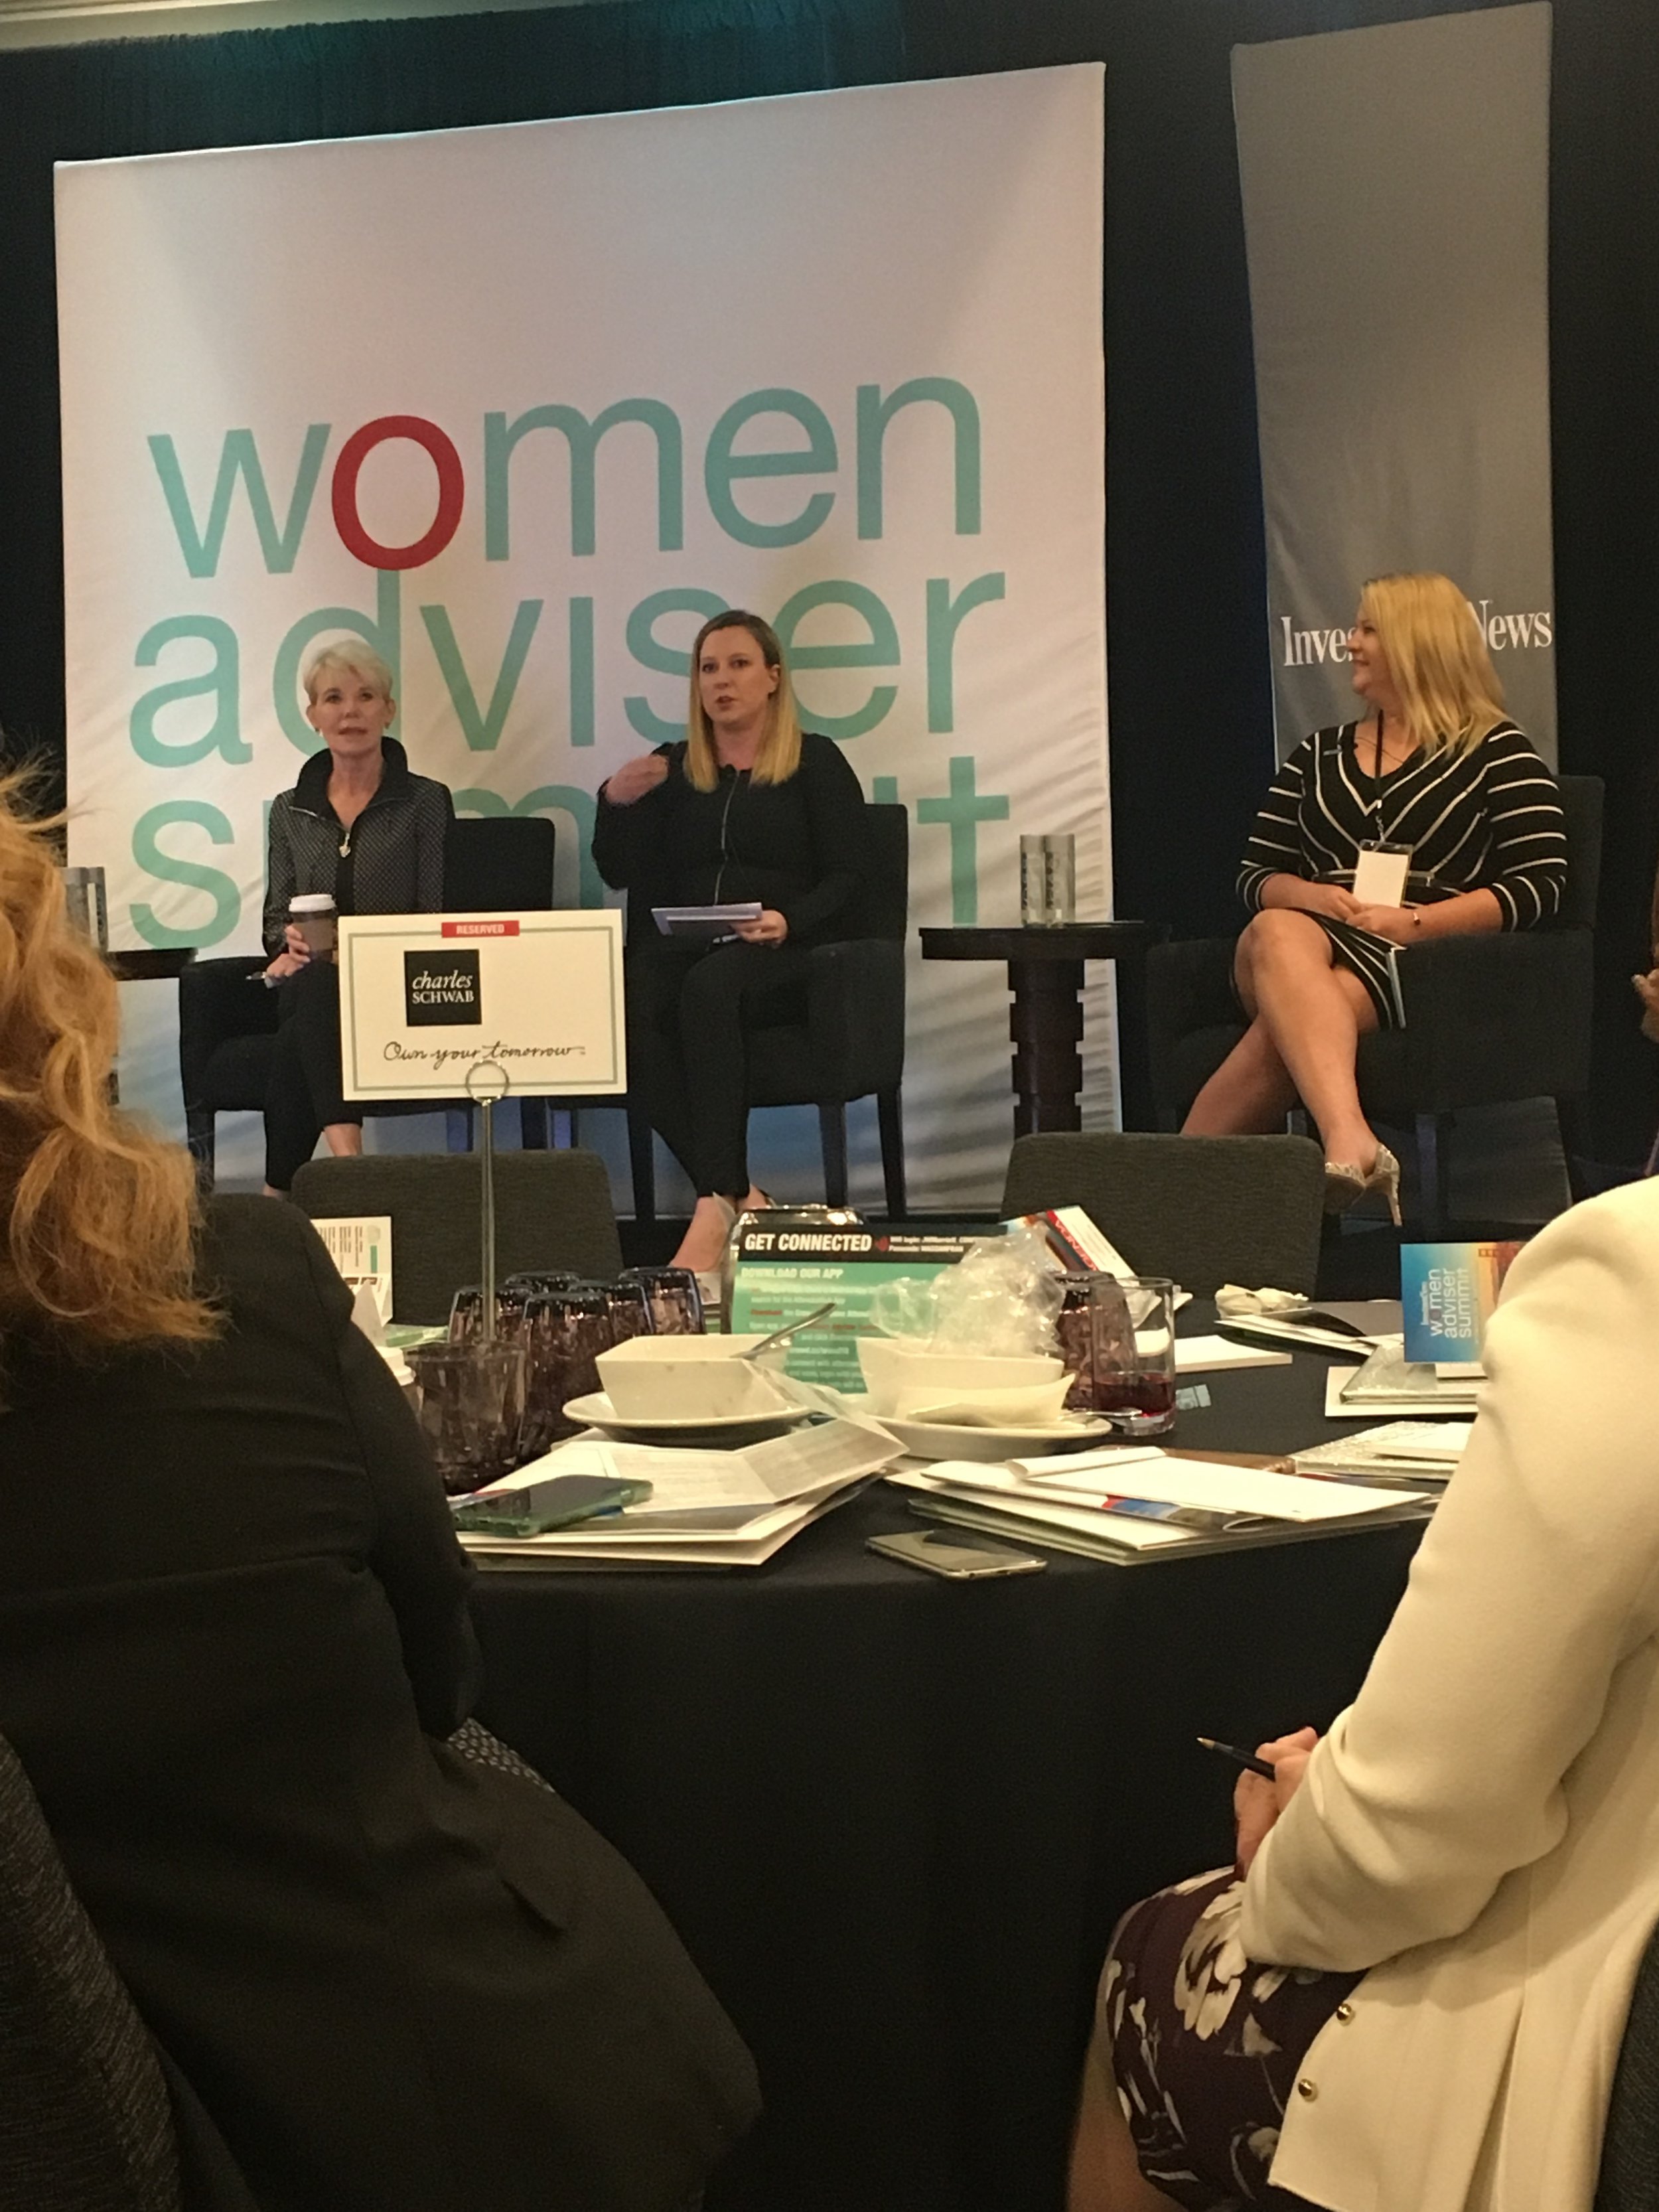  Cofounder of The W Source™ Hannah Buschbom (center) discussing business growth strategies with Joni Youngwirth (left) and Kristi Straw (right) at the InvestmentNews Women Adviser Summit in San Francisco, CA. 